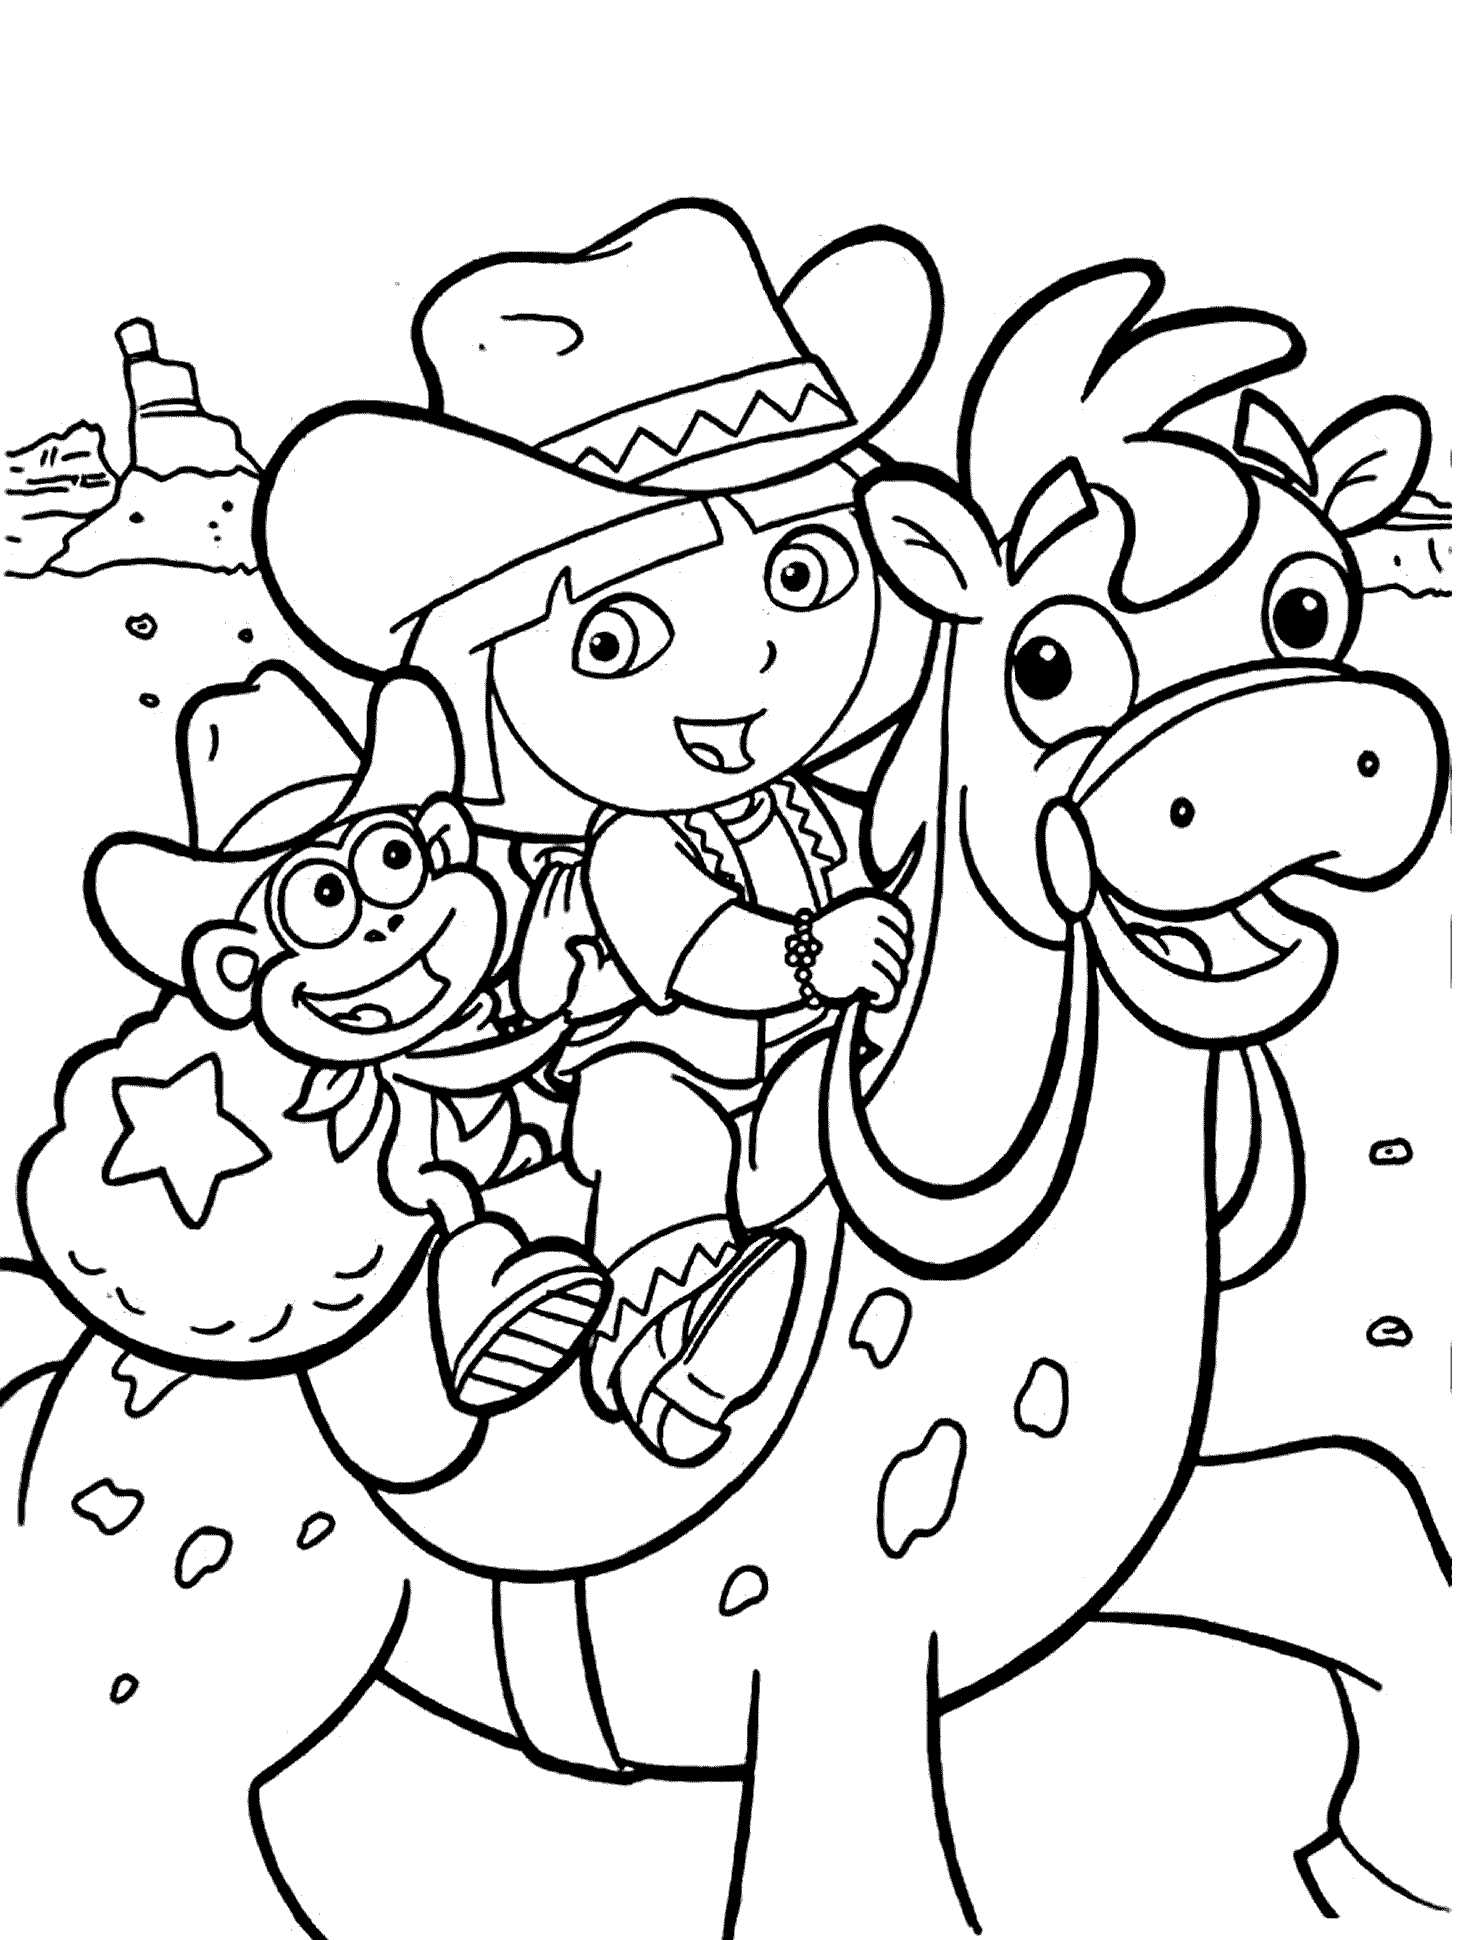 printable dora pictures 19 dora coloring pages pdf png jpeg eps free dora pictures printable 